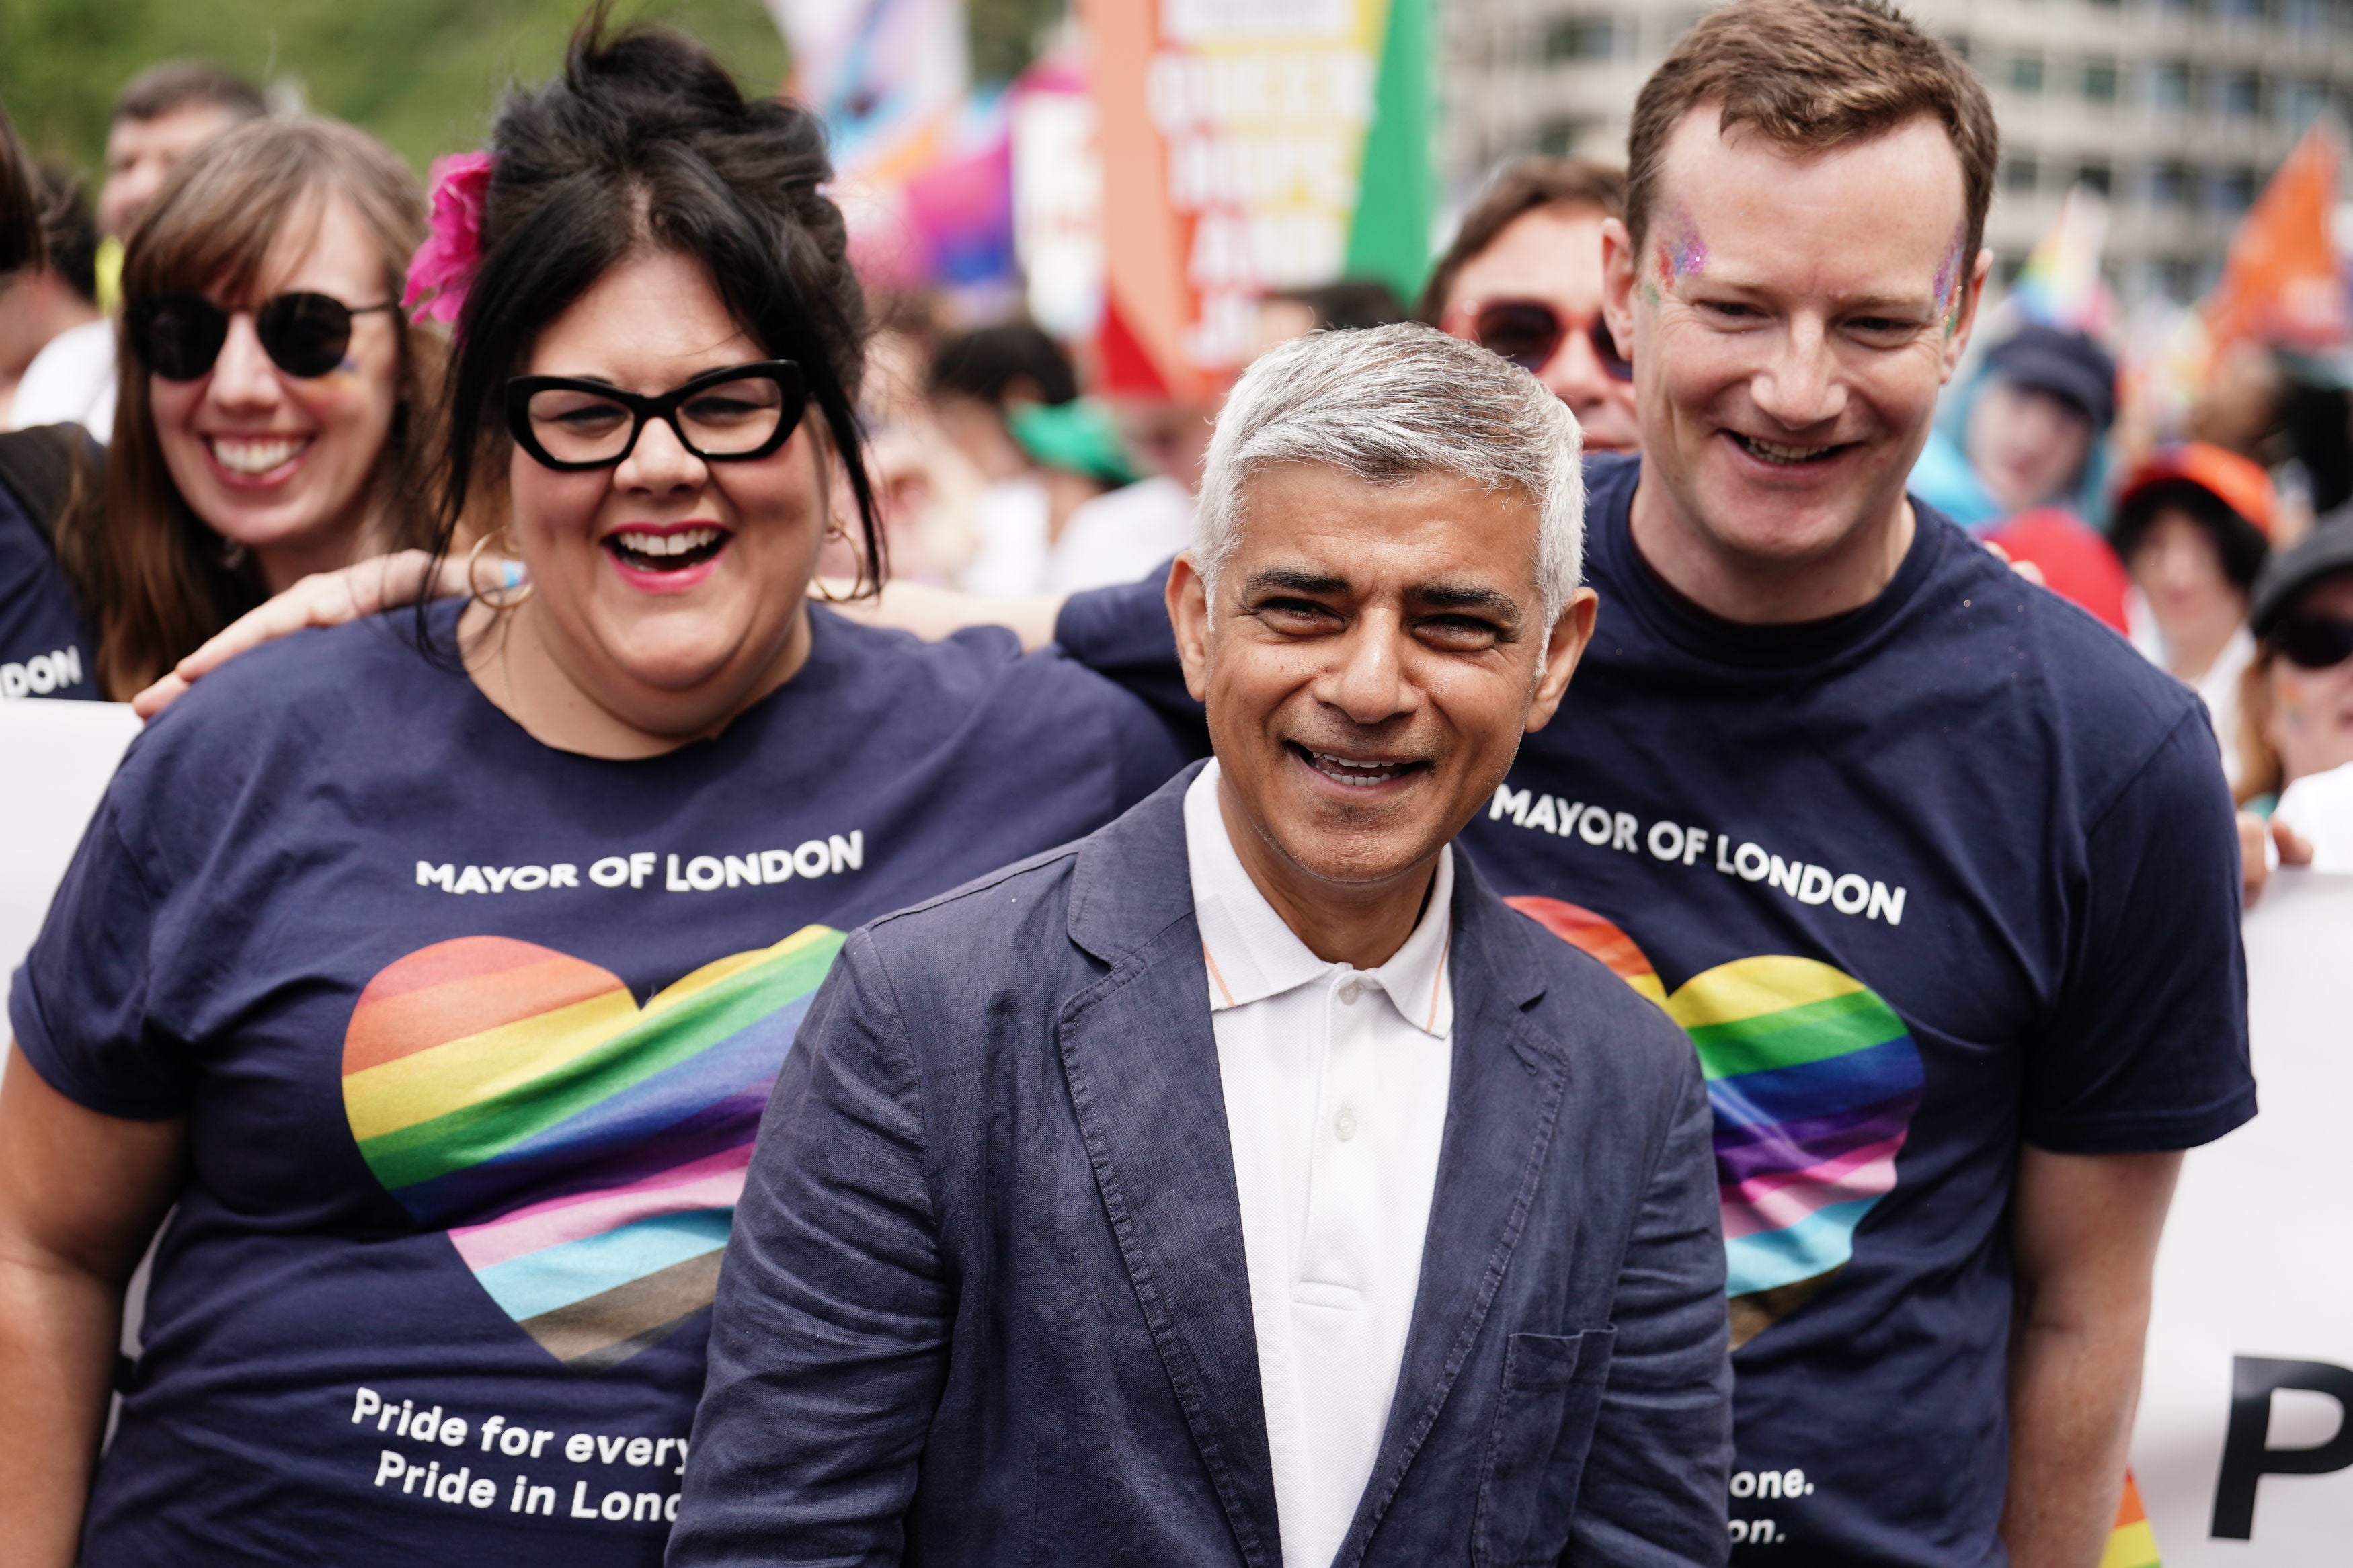 Sadiq Khan also took part in the celebrations but reminded people that it is also a time of protest